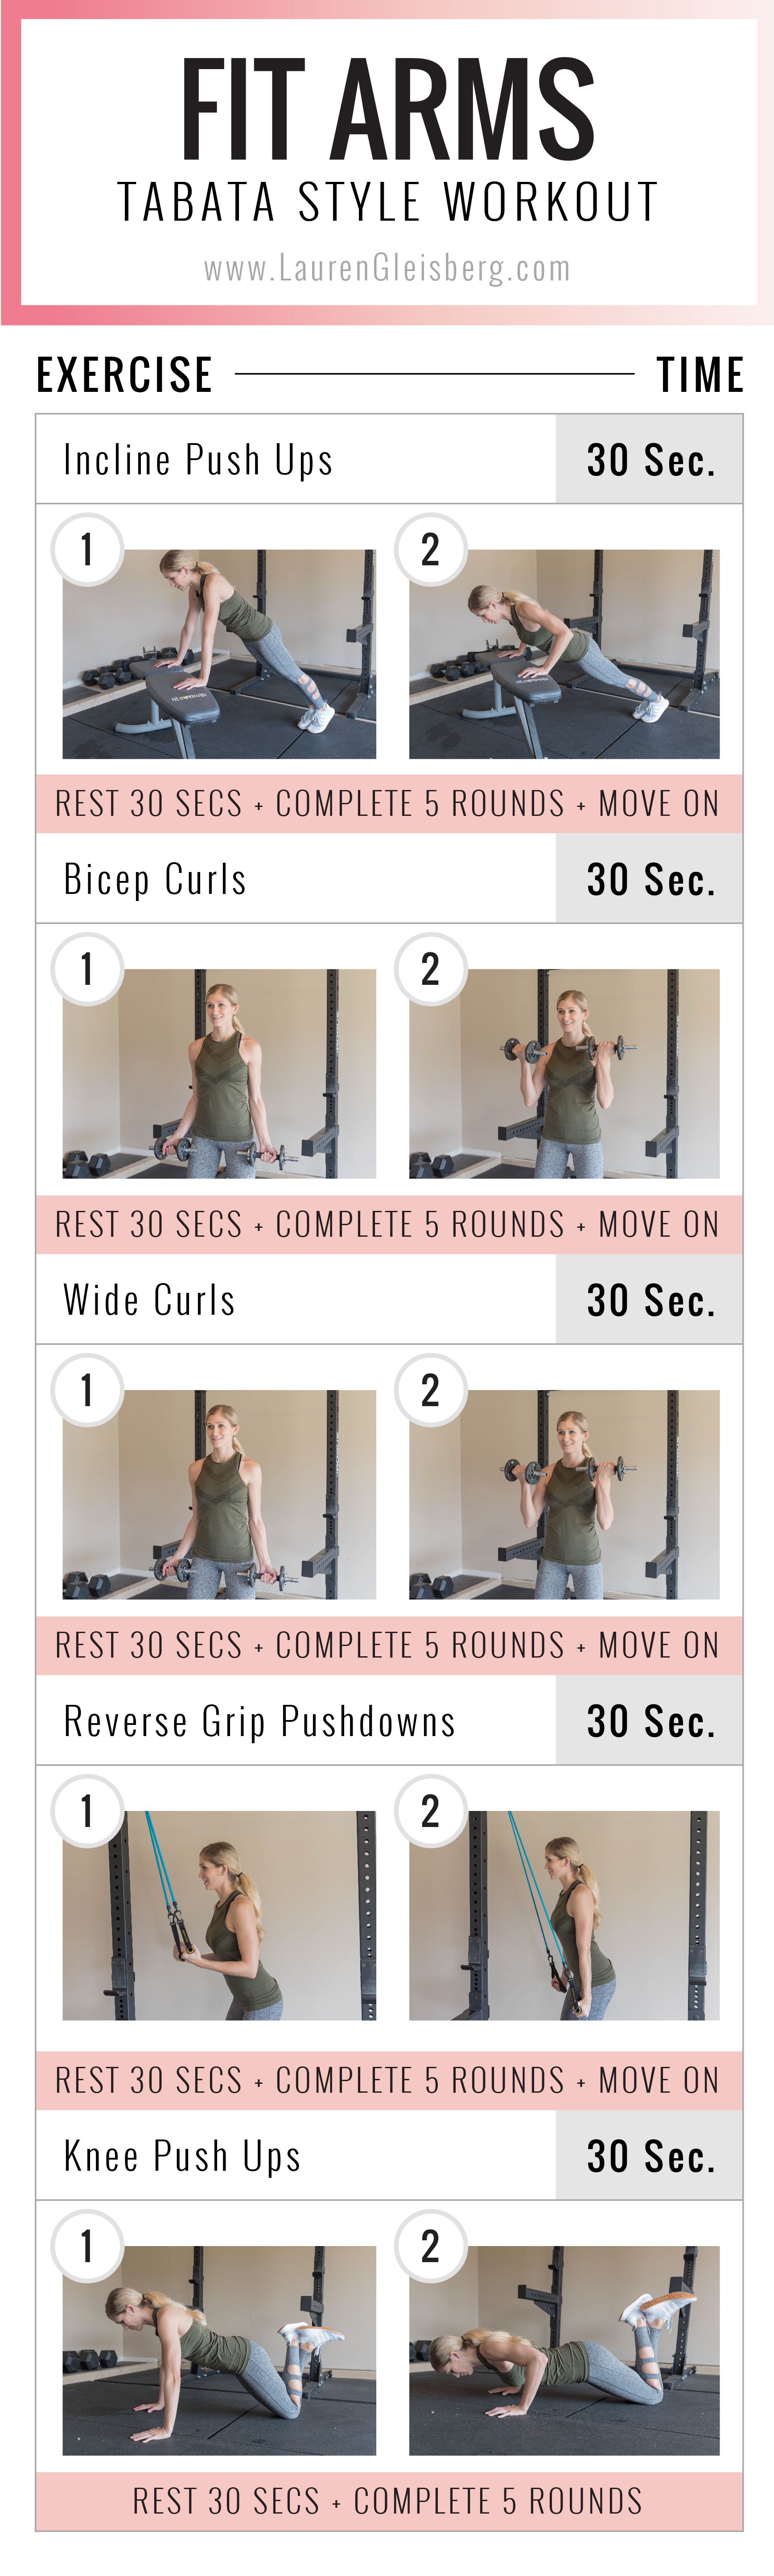 lauren gleisberg fit arms tabata style workout